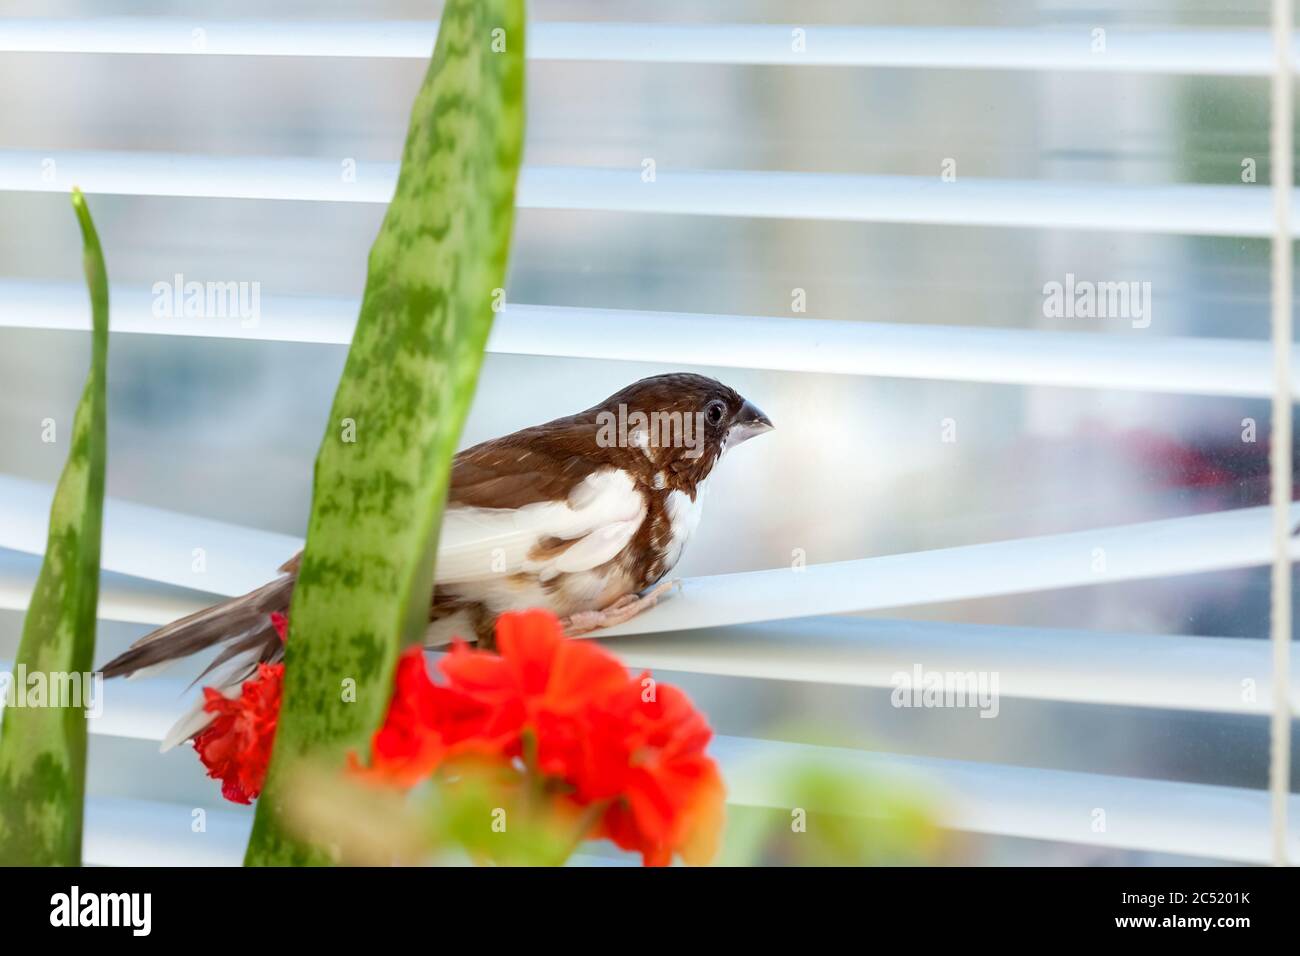 Japanese finch bird with brown and white feathers sits on aluminum window blinds and look on street, self-isolation during quarantine due to quarantin Stock Photo